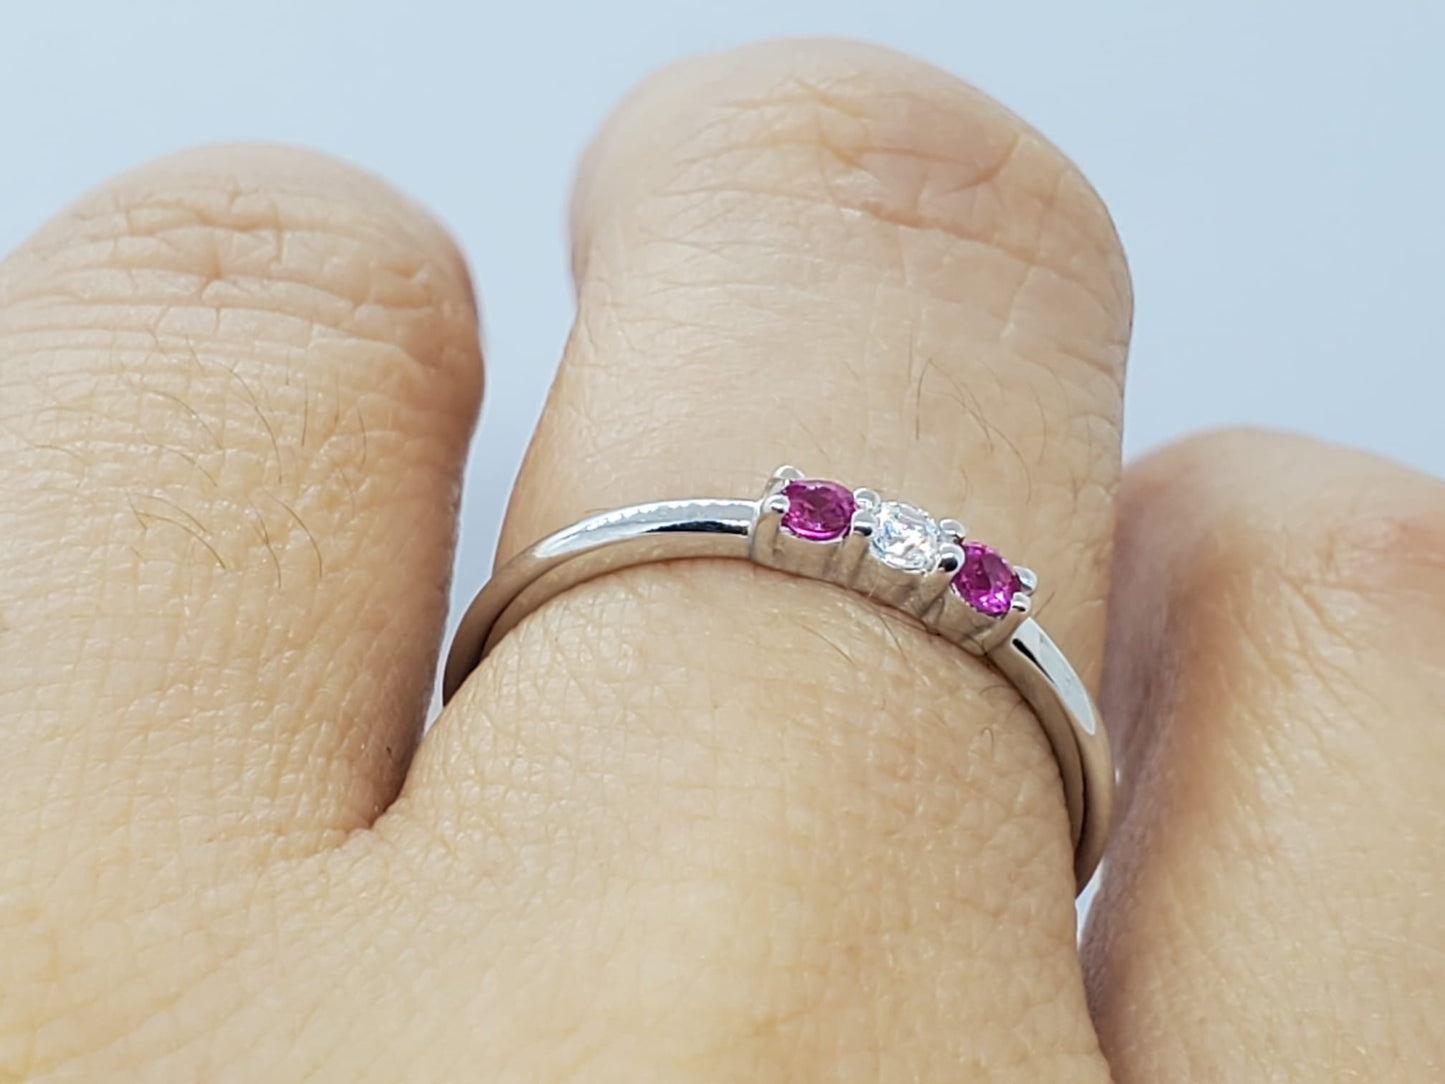 14k white gold ring, with 1 Diamond and 2 Ruby stones, very comfortable and elegant